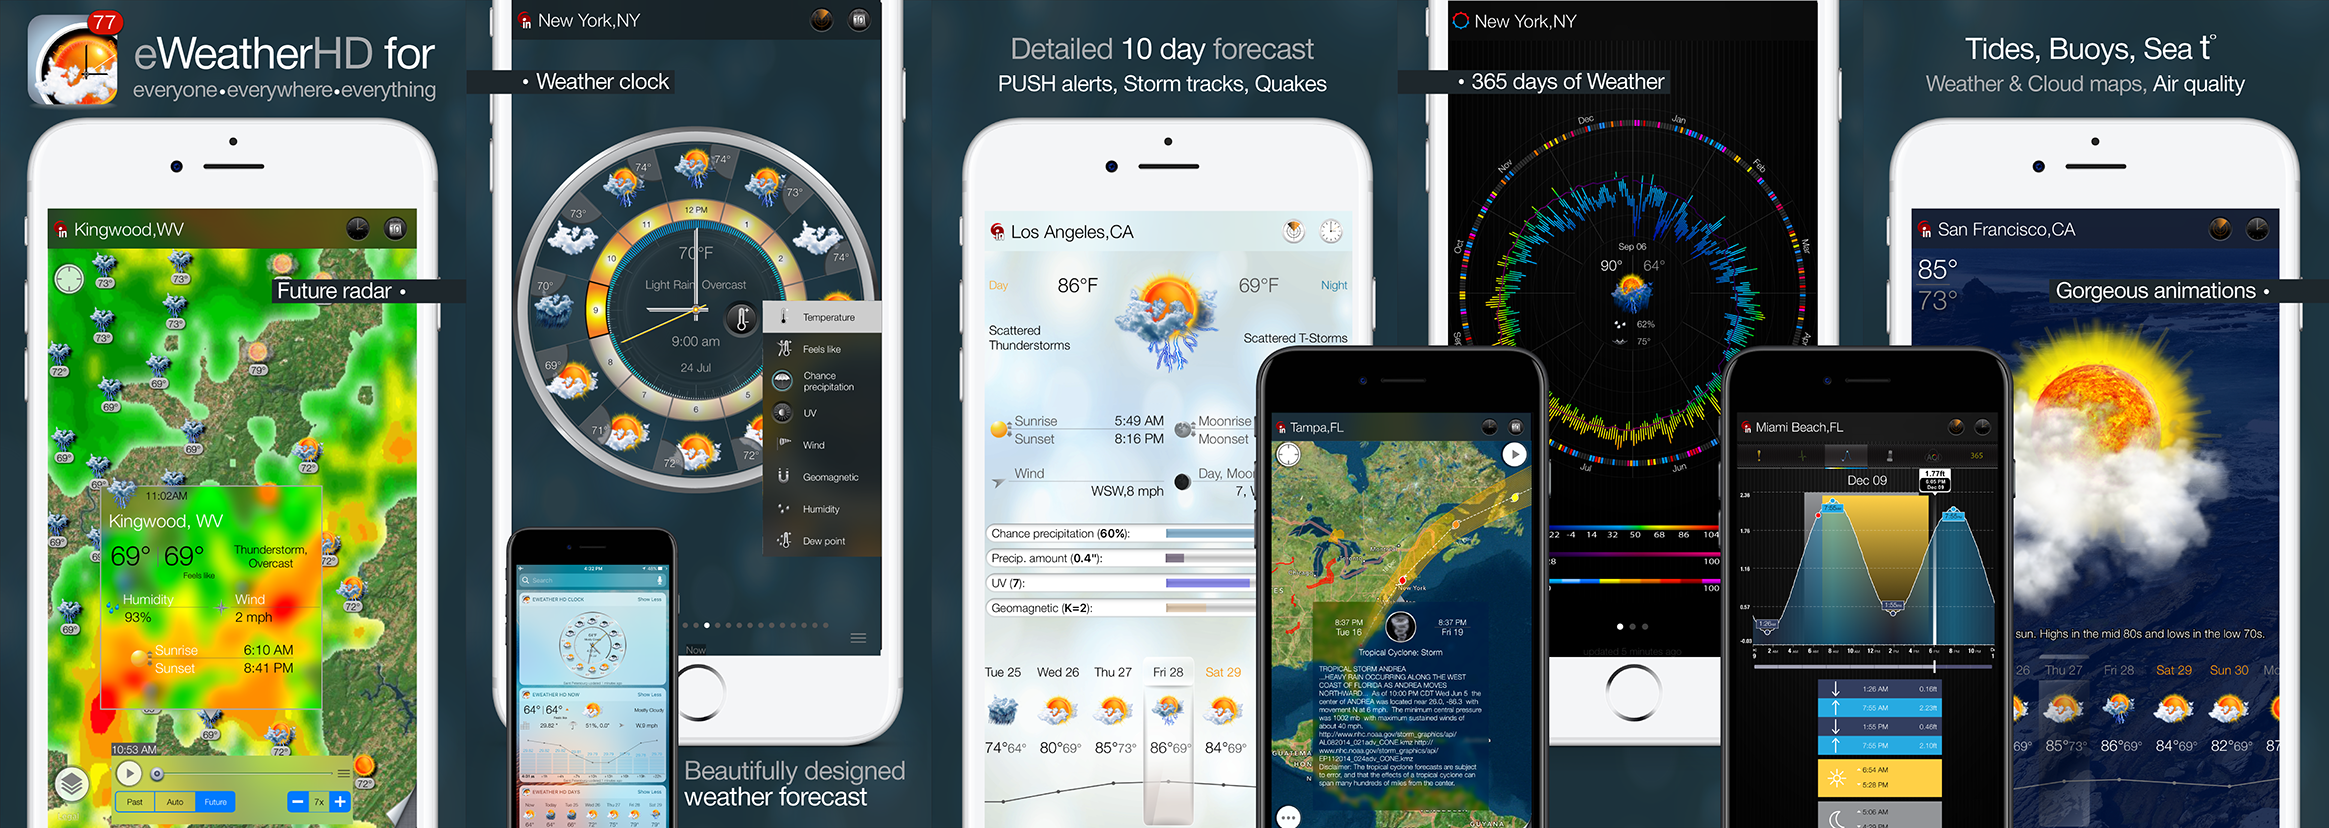 eWeather HD 3.7 for iPhone, iPad and Weather app for Apple Watch- the most informative weather app for Apple Watch, iPhone, iPad, PUSH alerts, radar, storm-tracker, earthquake, NOAA buoys app and weather widgets for iOS 11, ios 10, WatchOS 4, 10-day weather forecast, accurate hour-by-hour with weather clock widget, NWS weather alerts for USA and Meteoalarm alerts for Europe, hi-def rain/snow radar, animated satellite cloud cover, PUSH weather alerts, sea beach water temperatures, NOAA buoys and earthquakes, interactive weather maps, long-range weather forecasts, tide predictions, high and low tide times - Elecont LLC